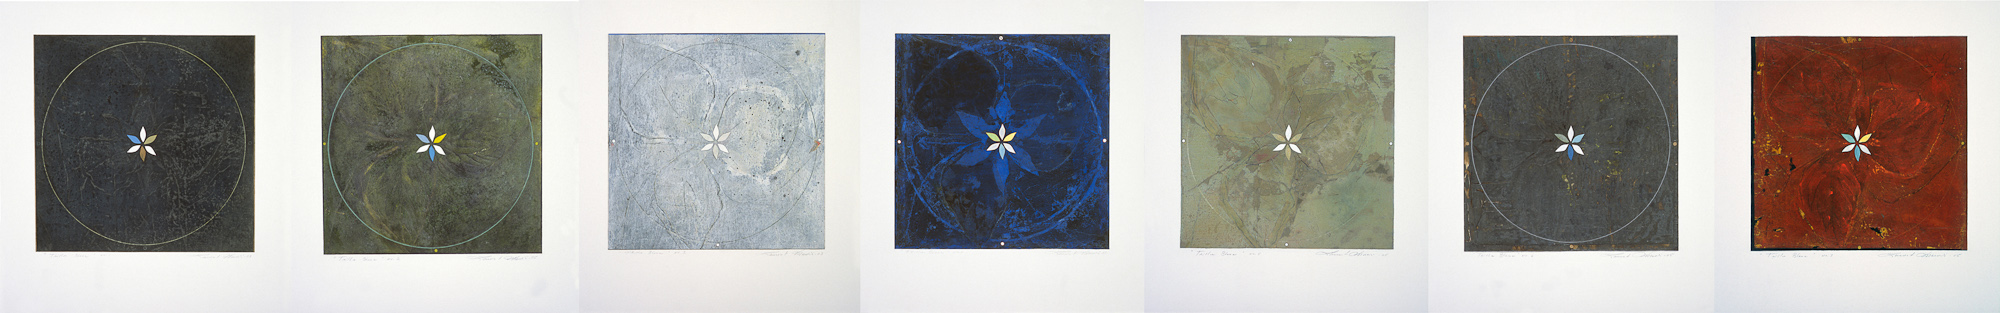 Trille blanc Série, 2003 - 2005. Gouache and pencil on high-weight paper, 44,5 x 280 cm.